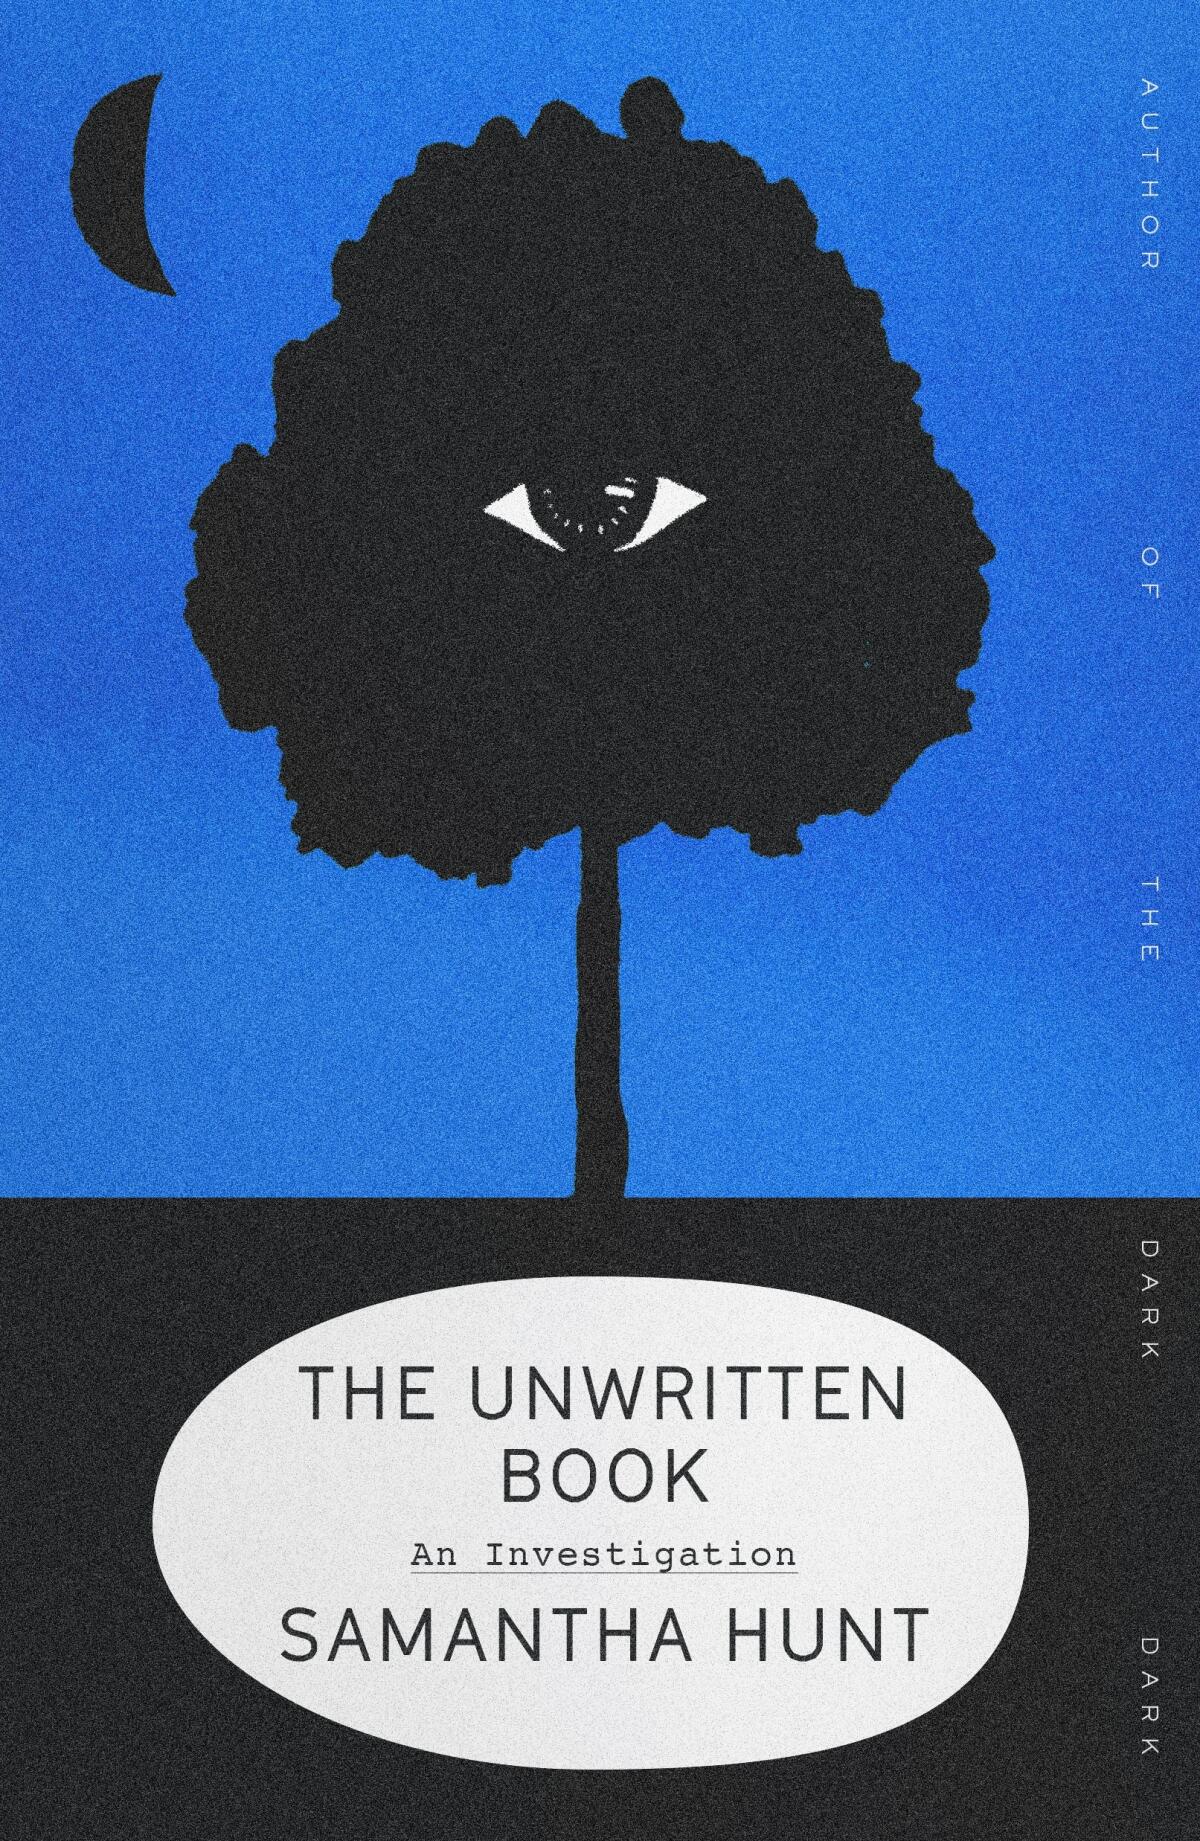 "The Unwritten Book: An Investigation," by Samantha Hunt